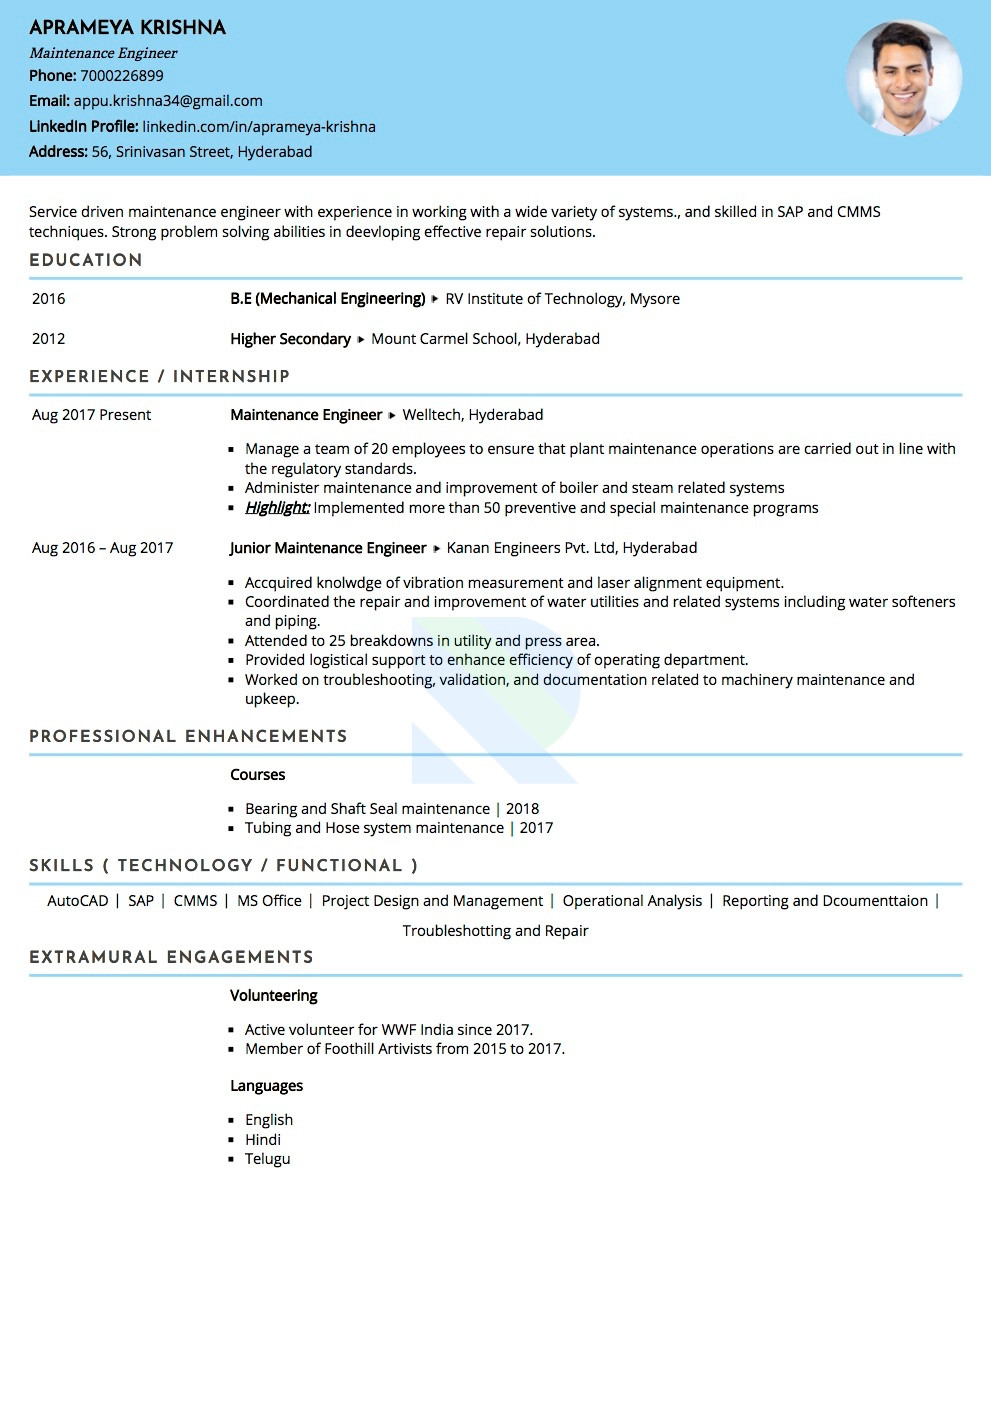 Sample Resume for Experienced Mechanical Maintenance Engineer Sample Resume Of Maintanance Engineer with Template & Writing …